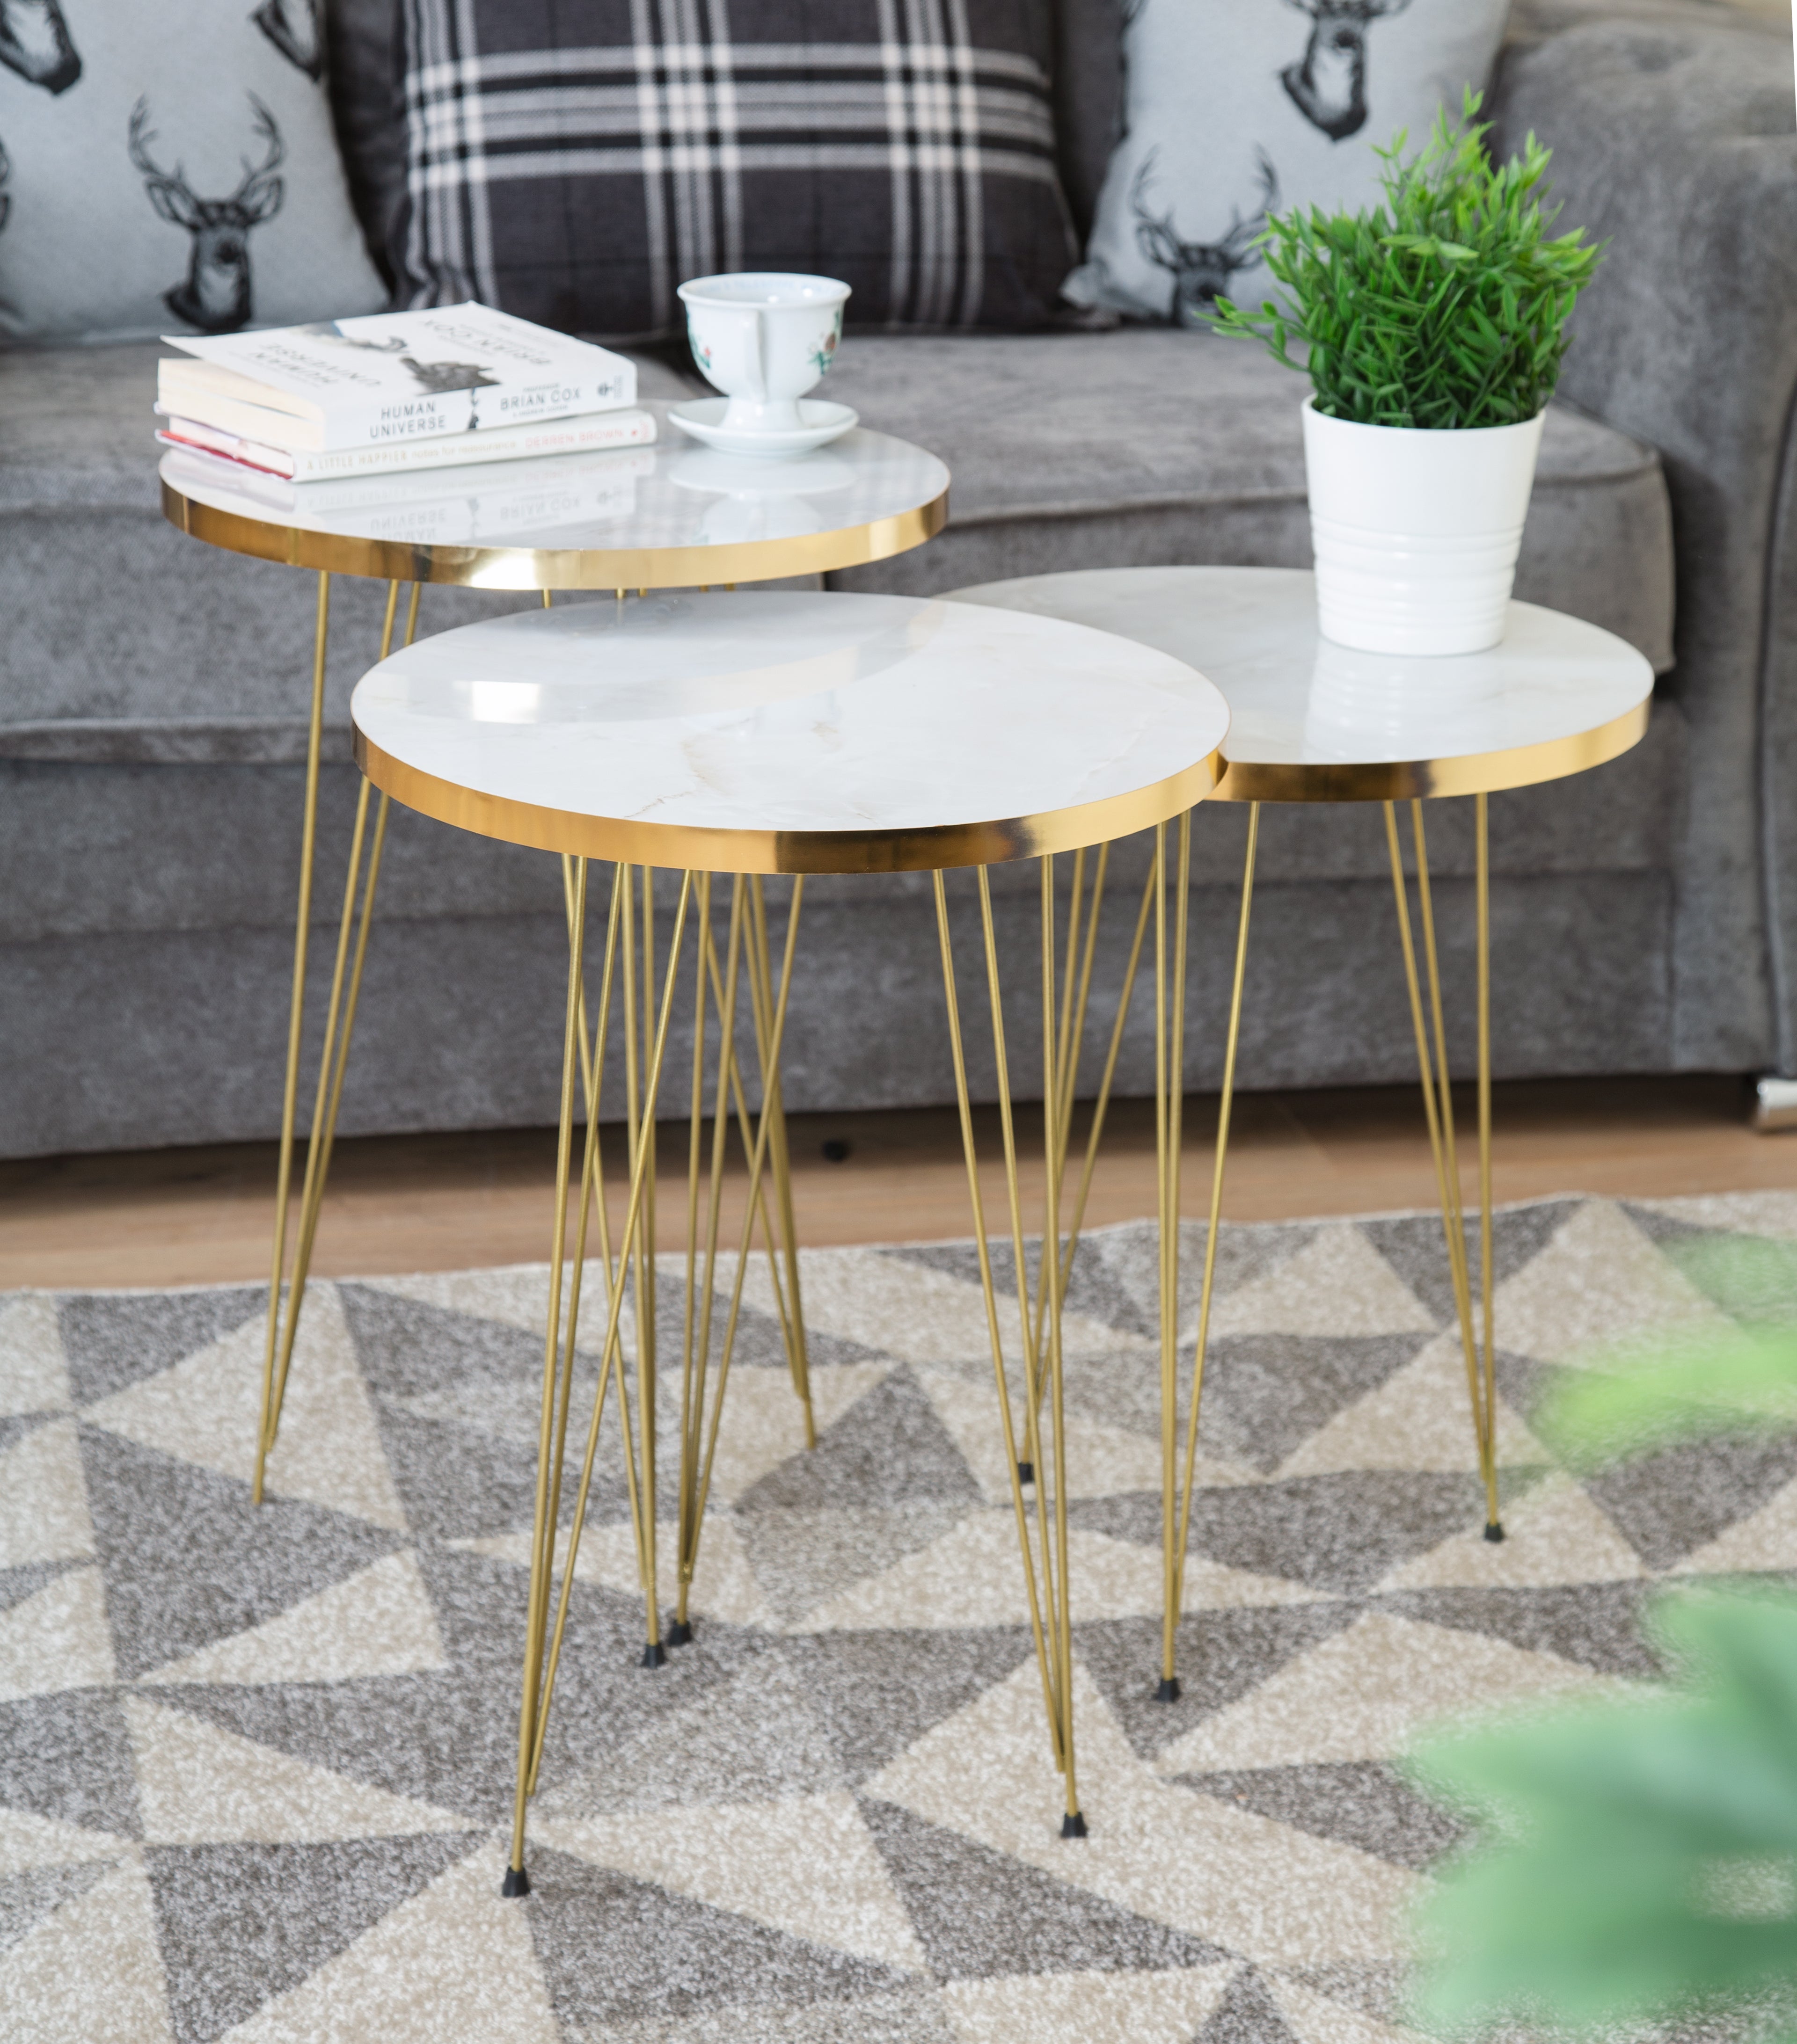 Tigris Set of 3 Round Side Tables - White & Gold Marble